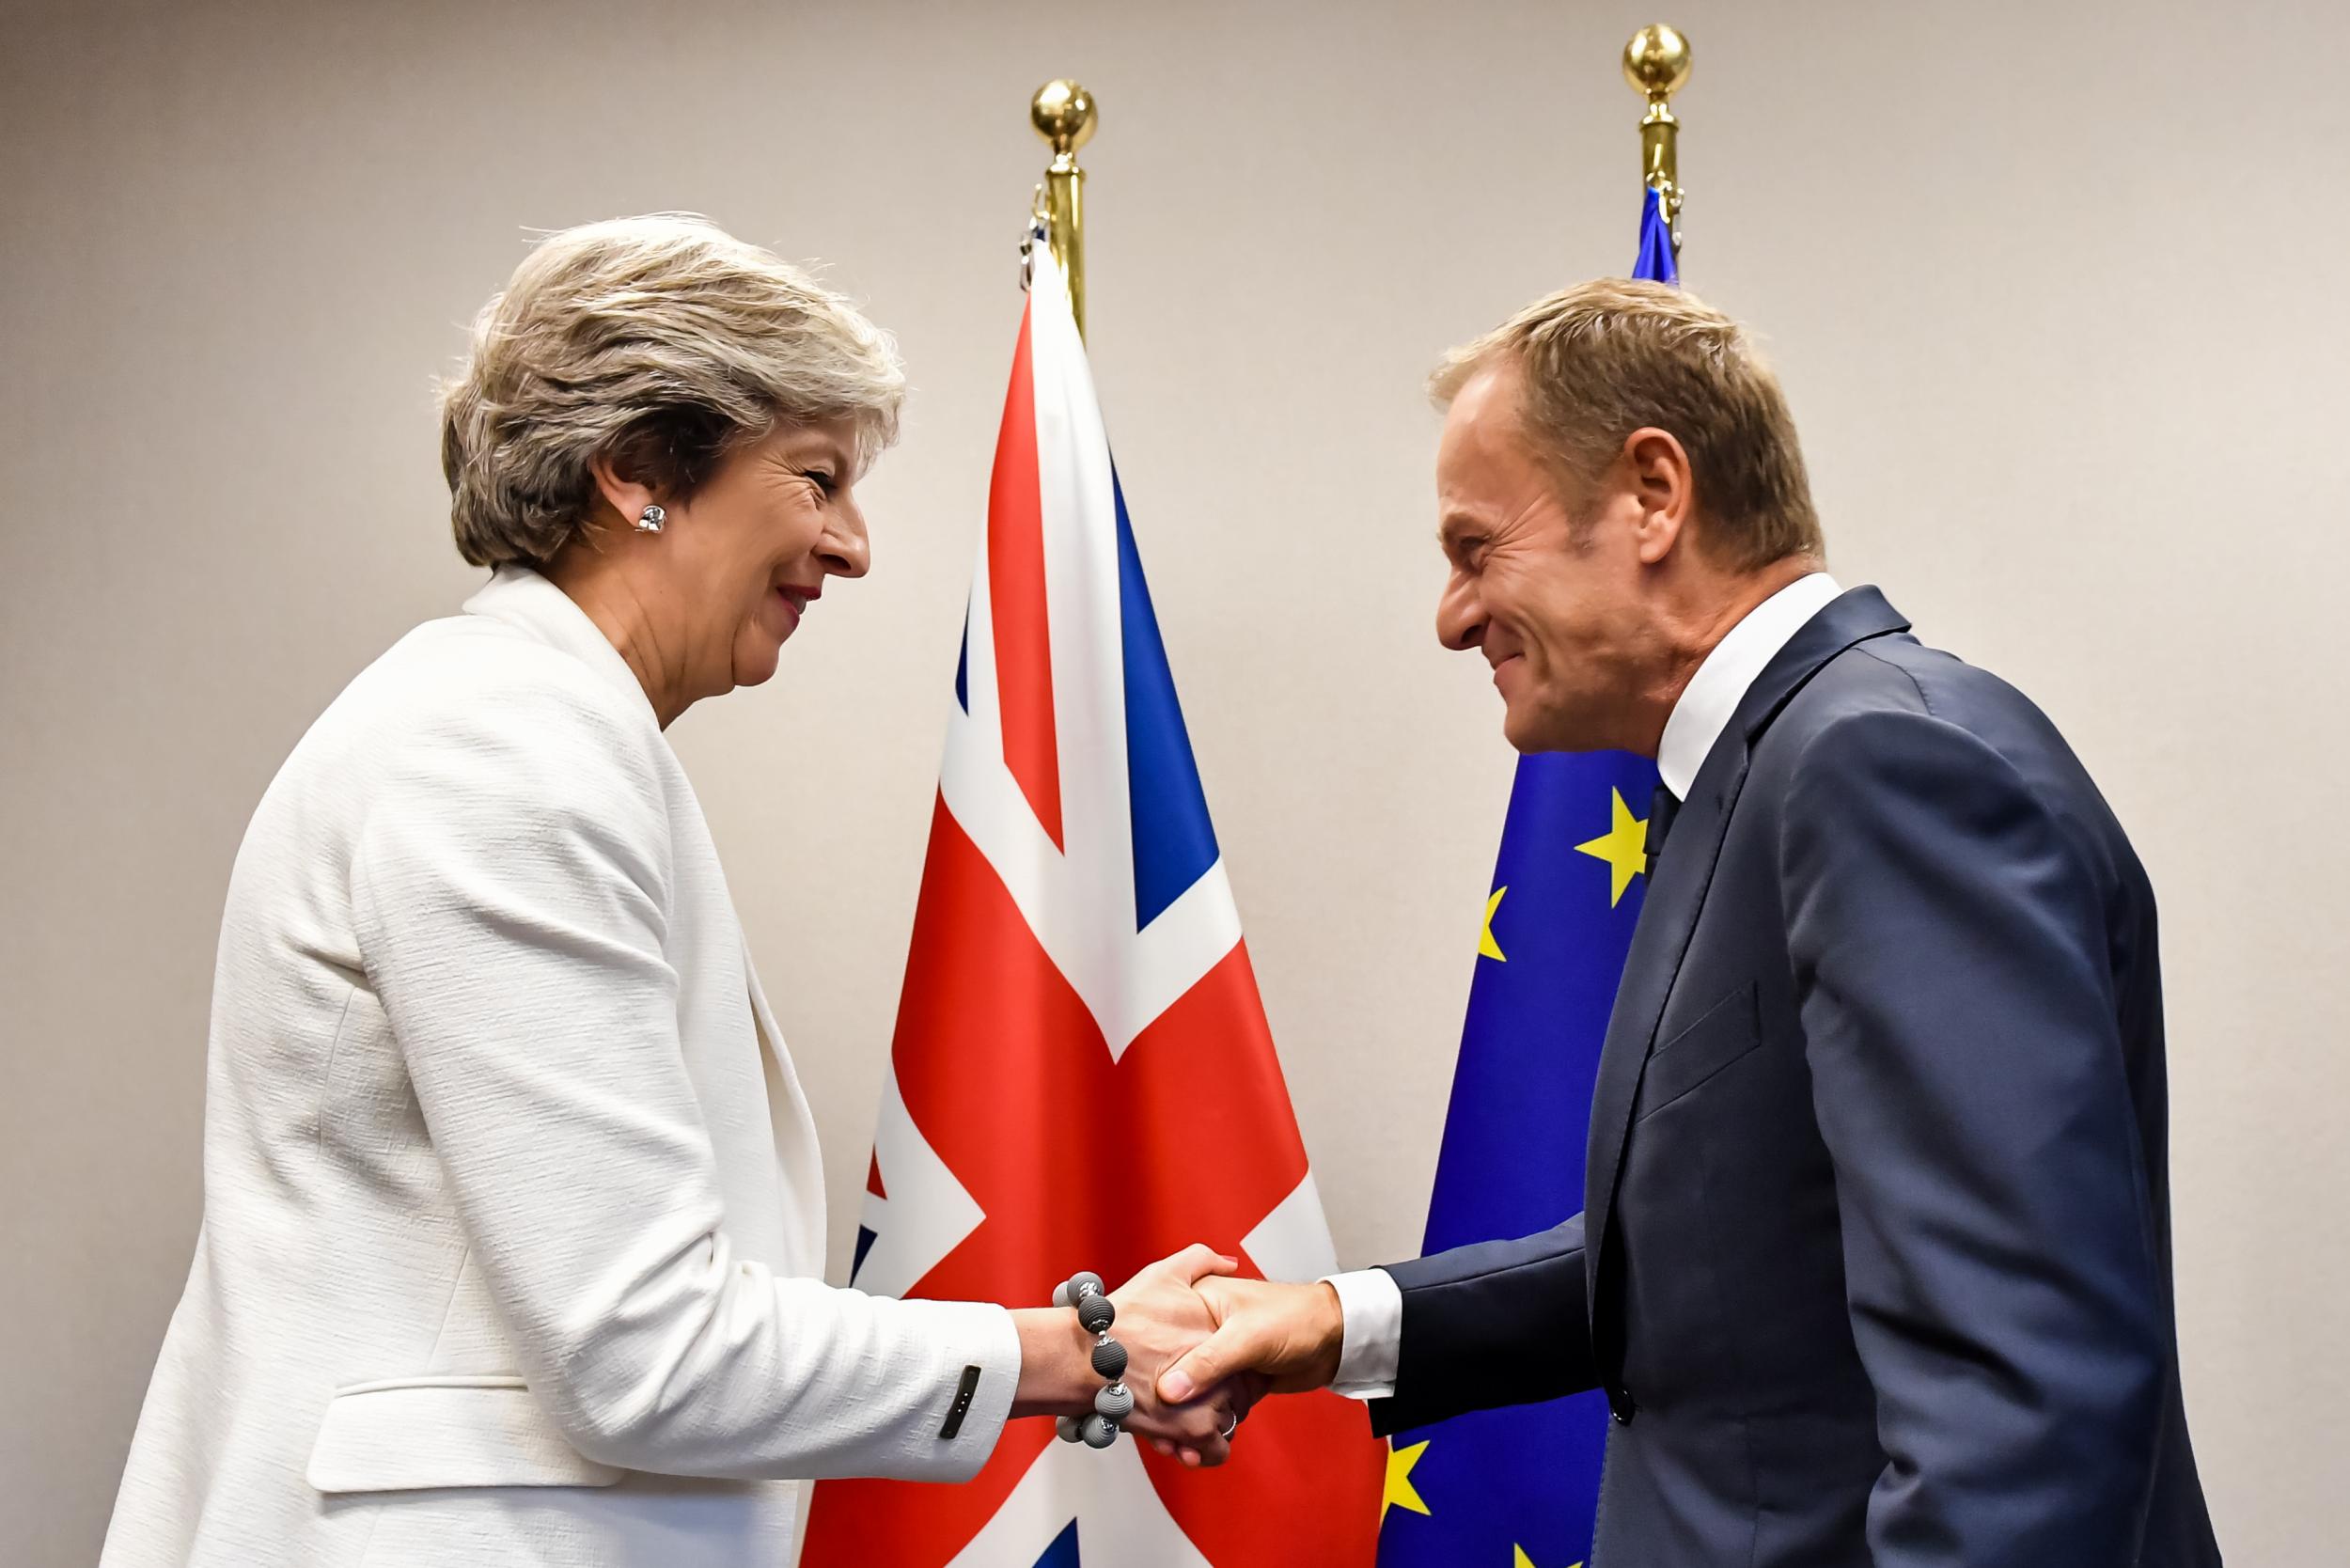 Theresa May has been given 10 days by European Council President Donald Tusk to improve her Brexit offer